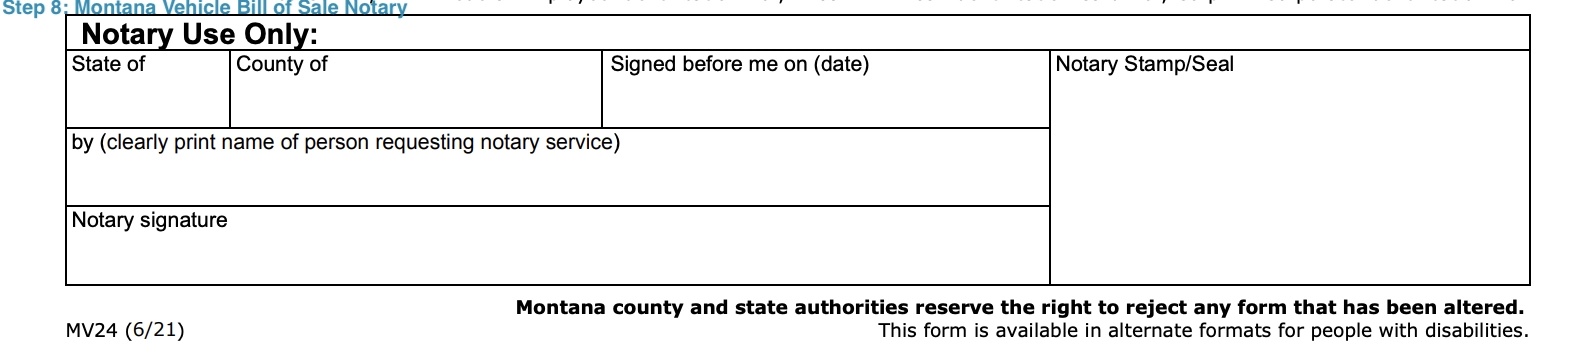 step 8 to filling out a montana vehicle bill of sale form notary